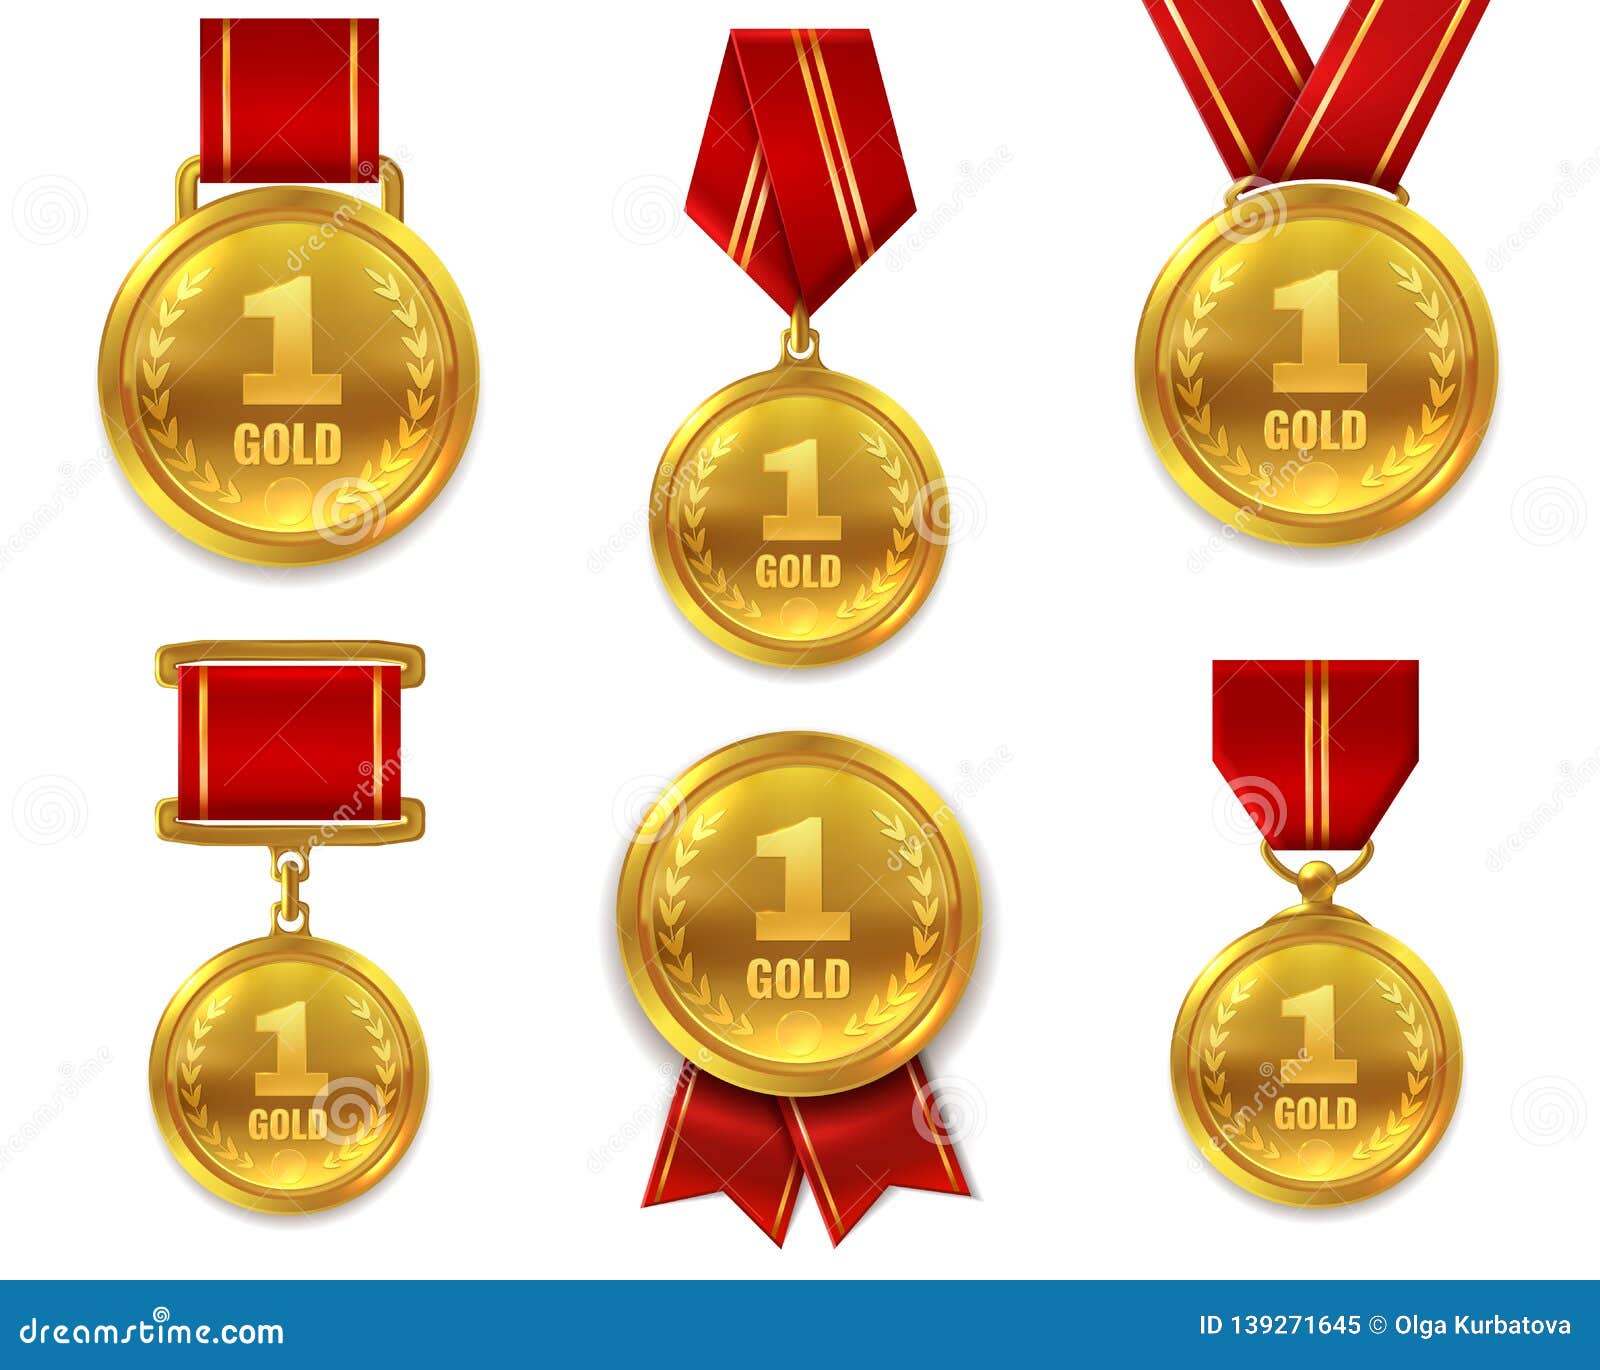 champion gold medals. award winner trophy golden medal sport reward competition first best hero red ribbon coin prize